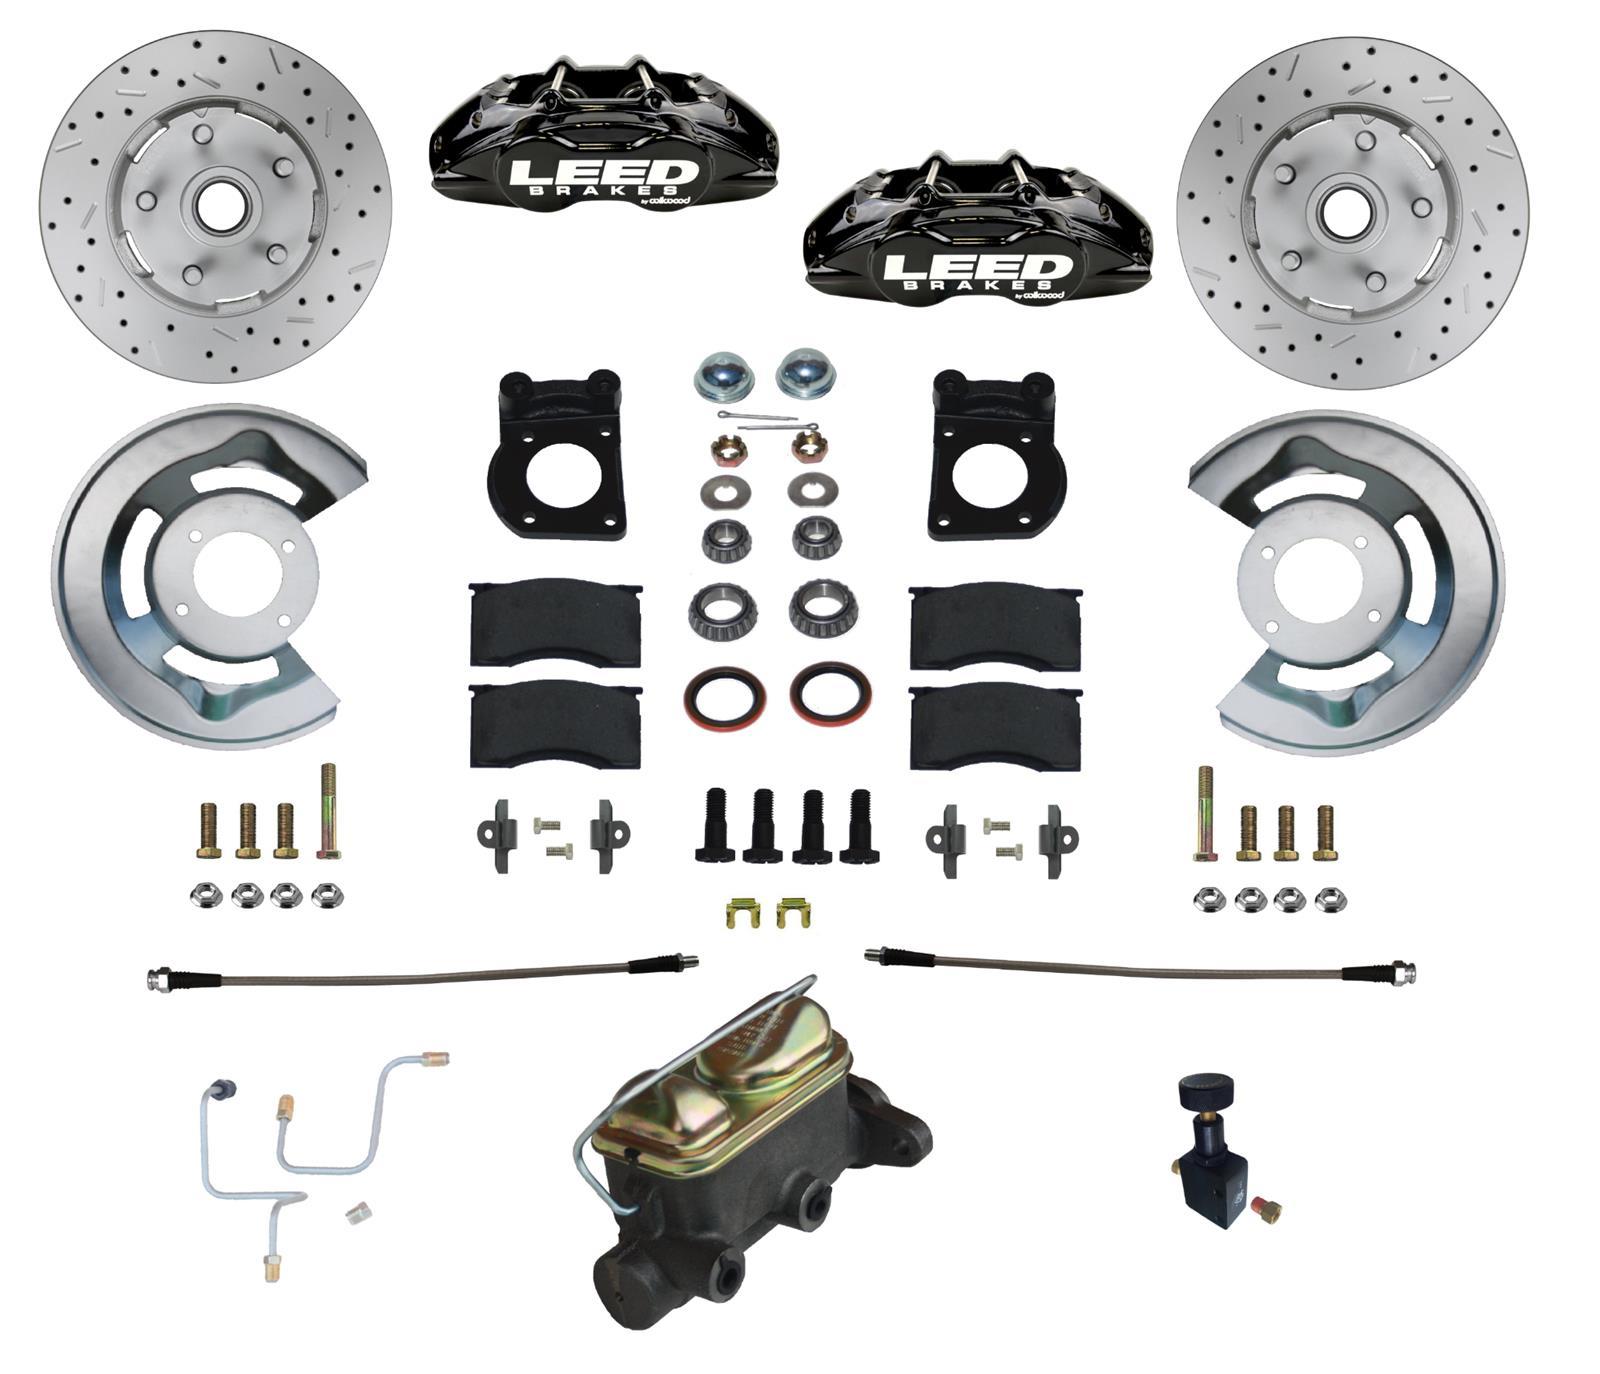 Leed Brakes BFC0005-405X Brake System, MaxGrip Lite, Front, 4 Piston Caliper, 11.33 in Drilled / Slotted Rotor, Pads / Calipers / Dust Cap / Backing Plates / Master Cylinder / Proportioning Valve, Aluminum, Black Powder Coat, Ford Mustang 1965-66, Kit